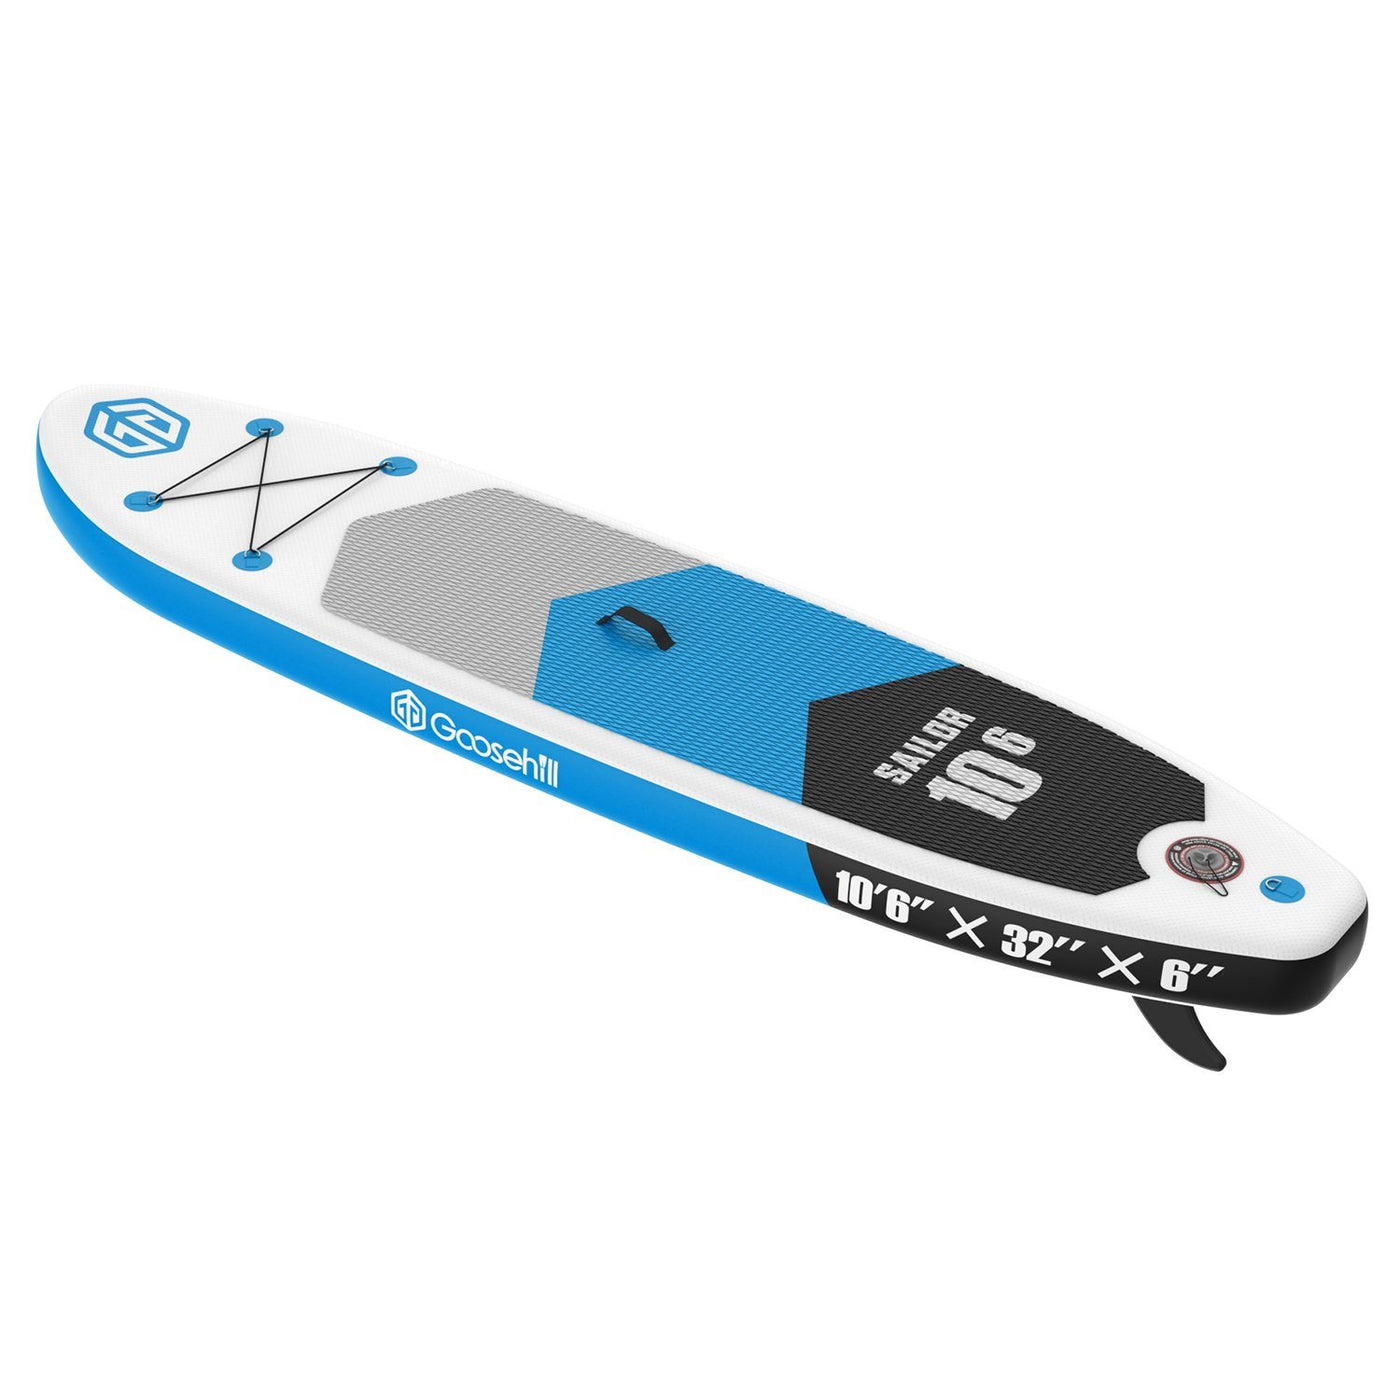 Inflatable Standup Paddleboard - Goosehill Sailor SUP goosehill